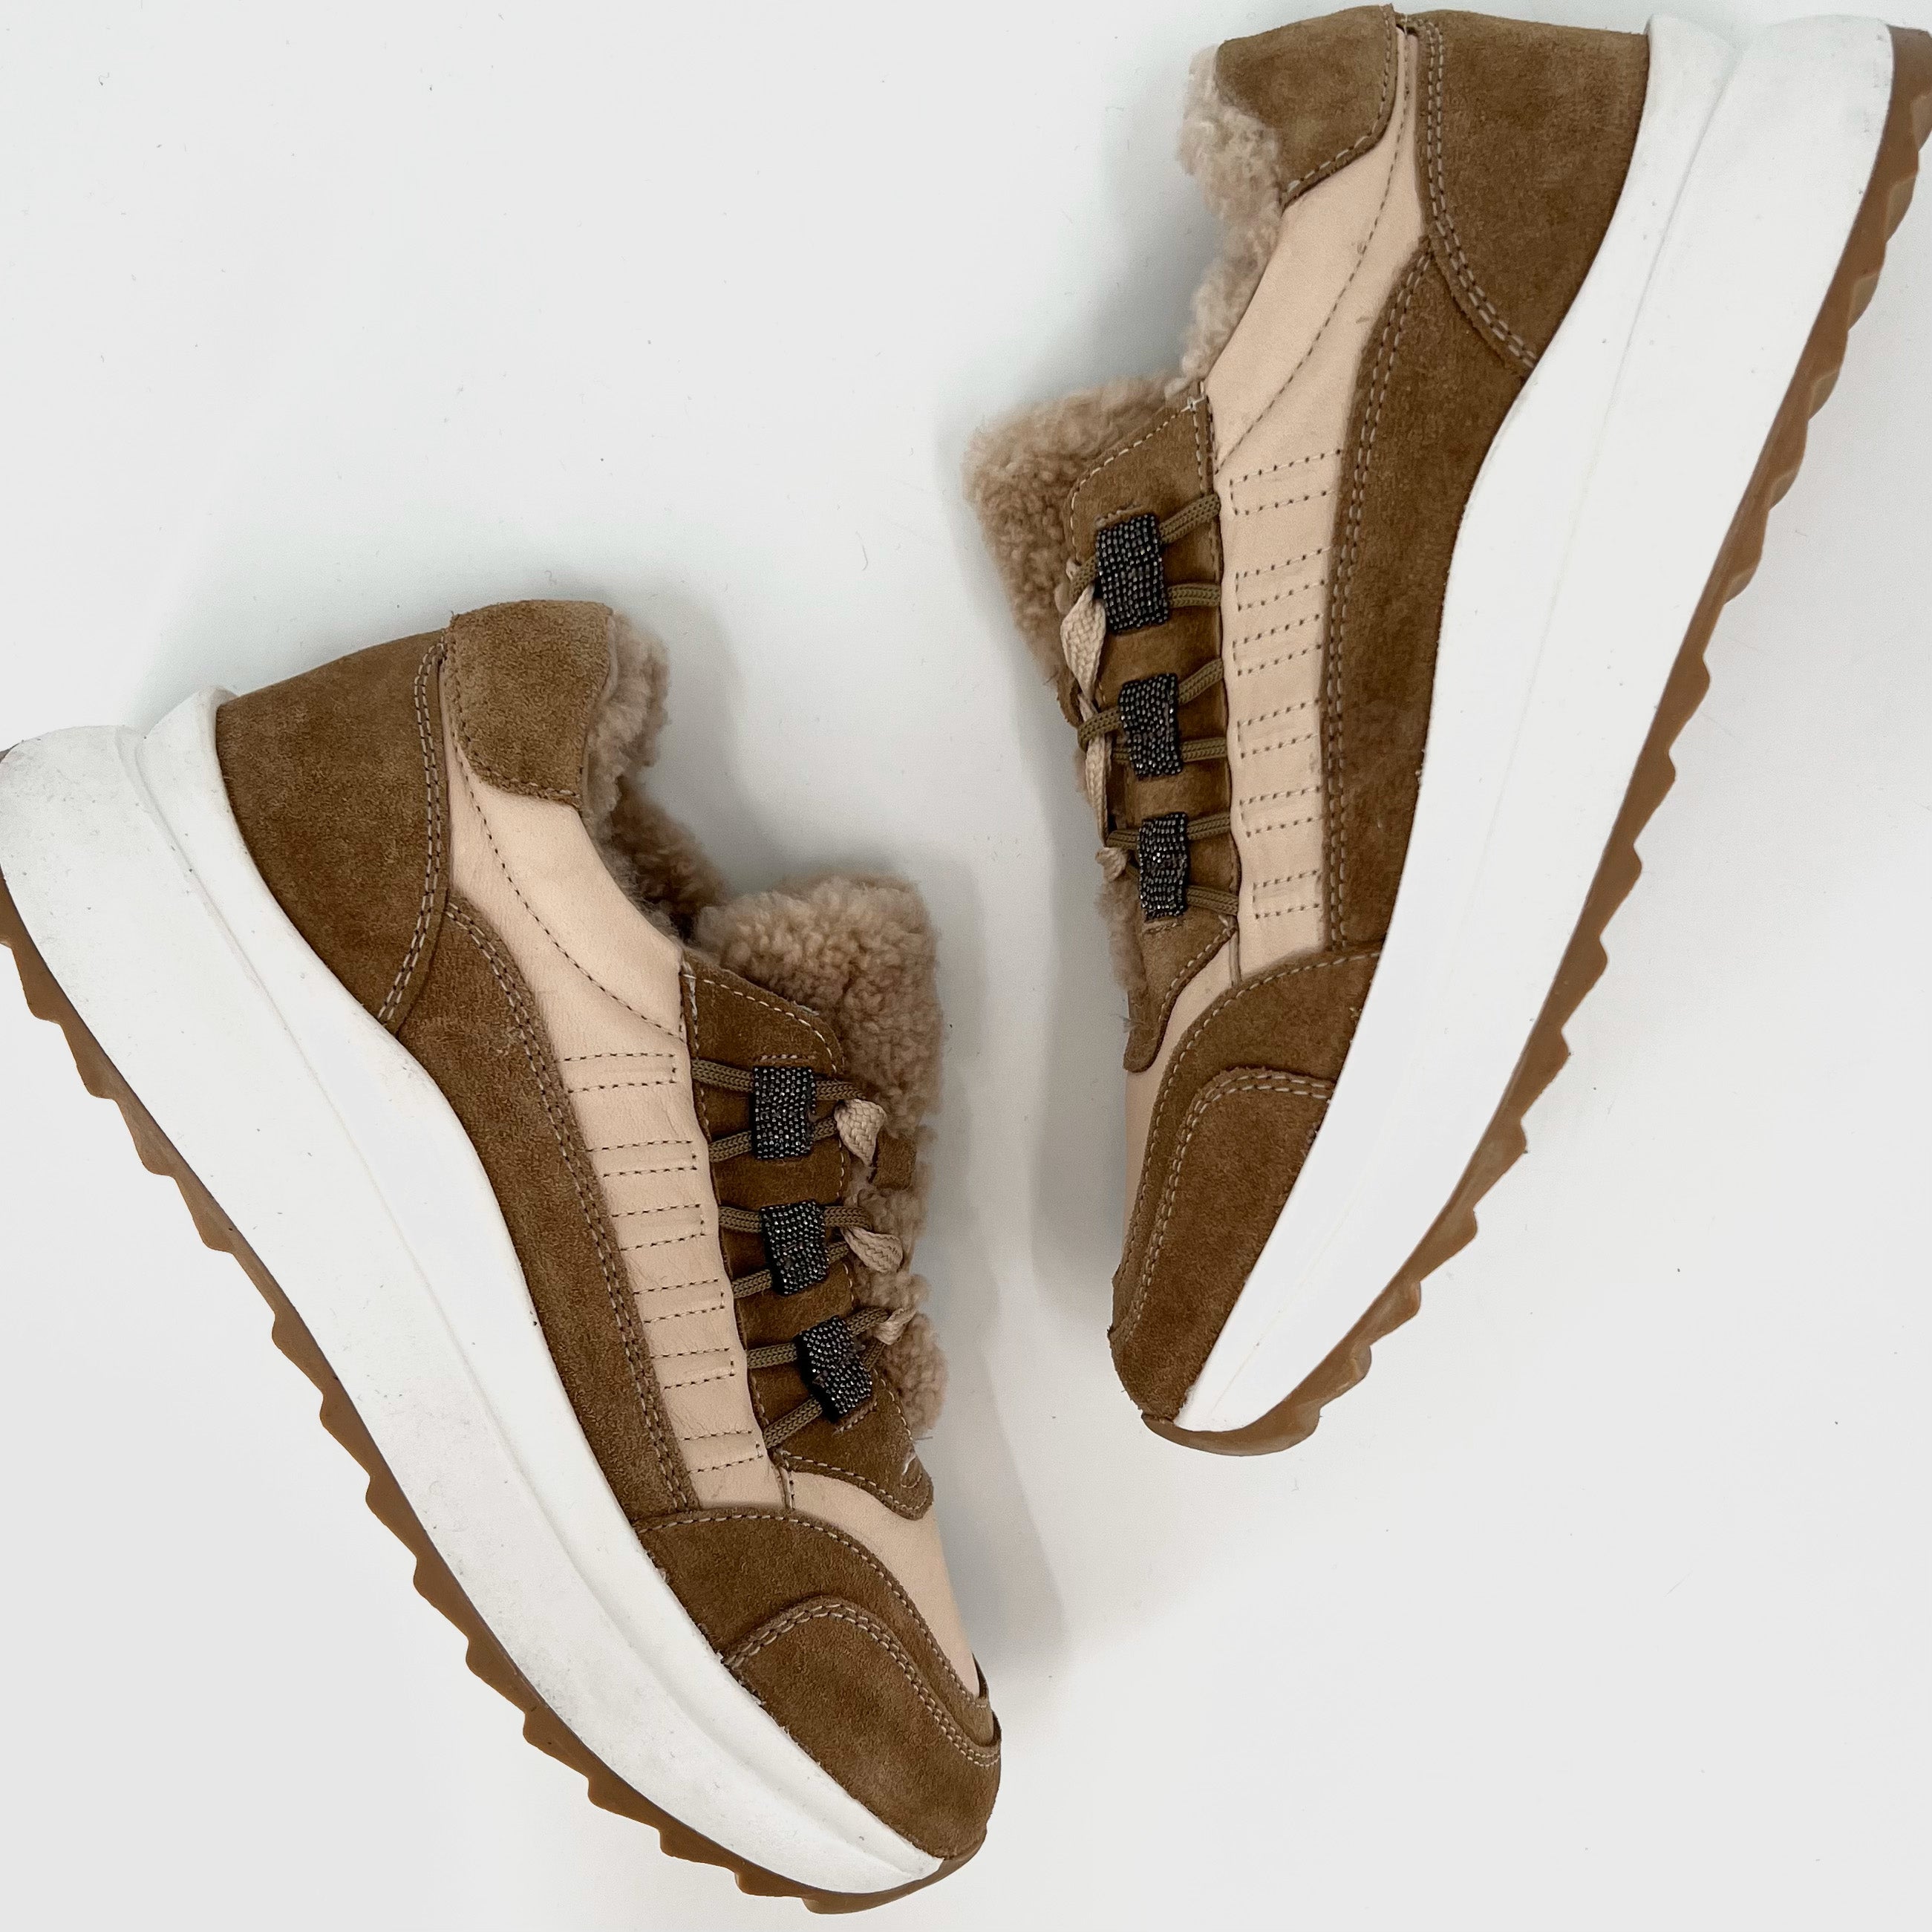 The Fur Lined Lace Trainer in Tan